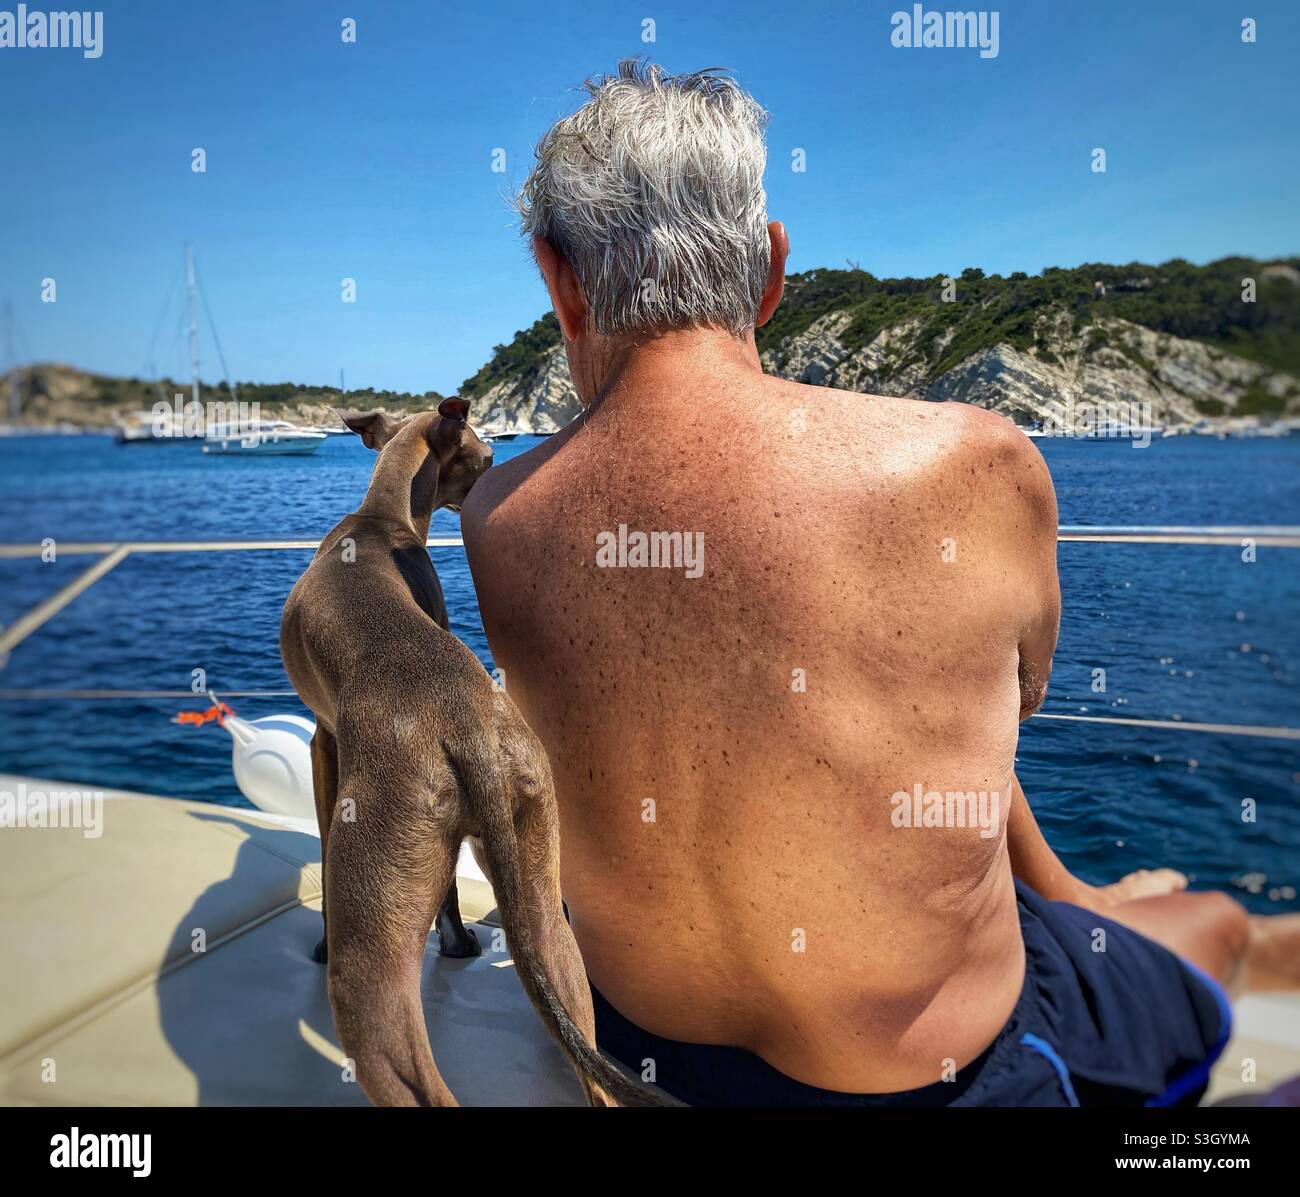 An old man with a dog on a boat in the sea Stock Photo